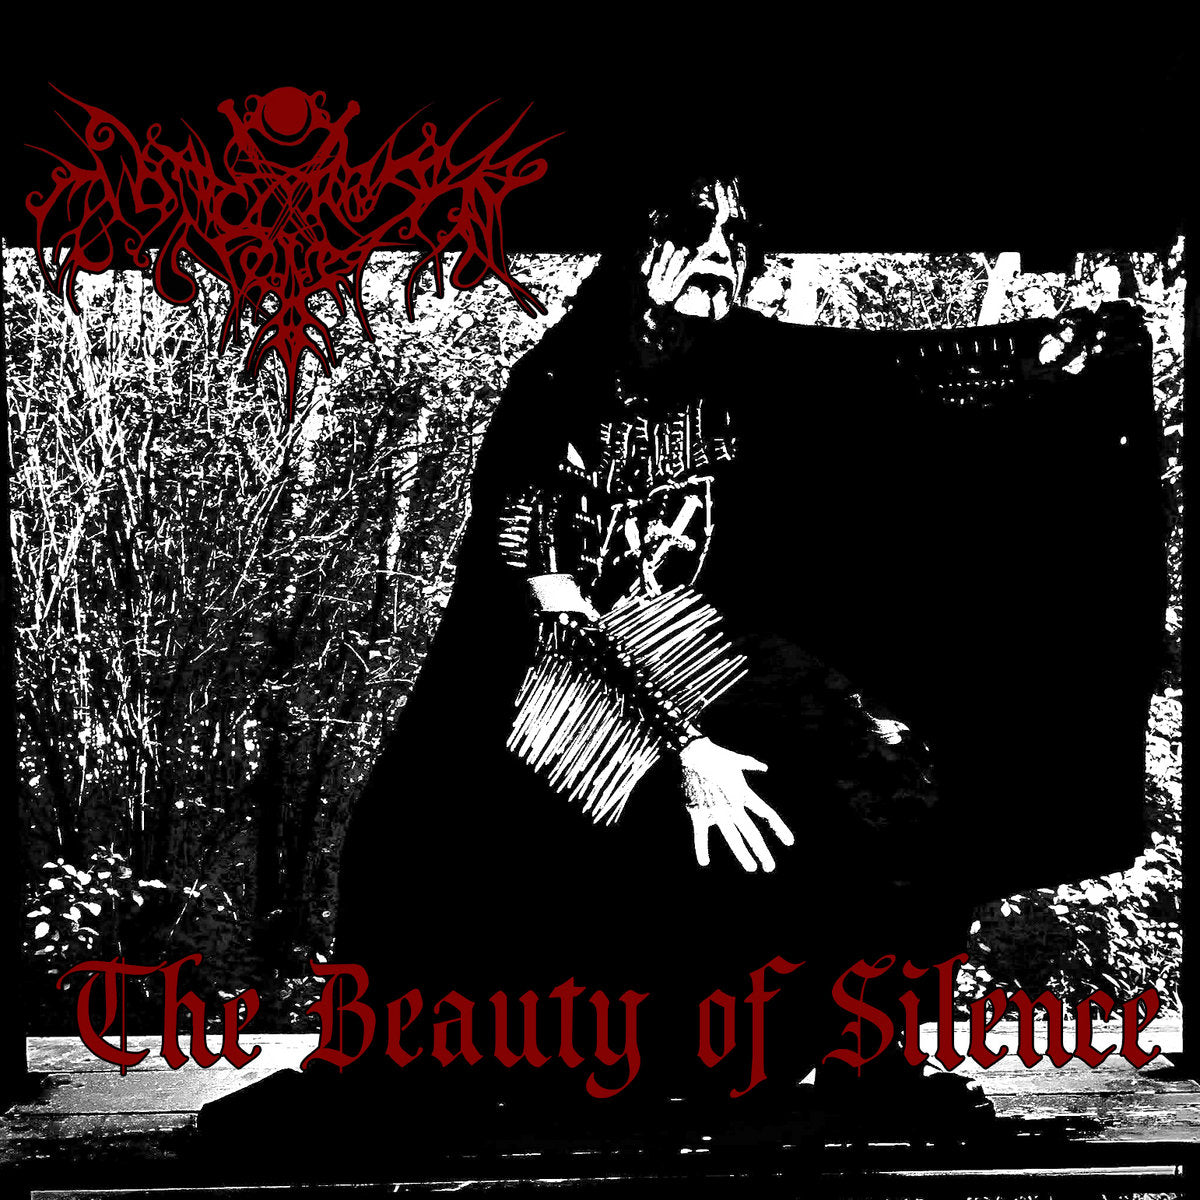 [SOLD OUT] WITCHES FOREST "The Beauty of Silence" cassette tape